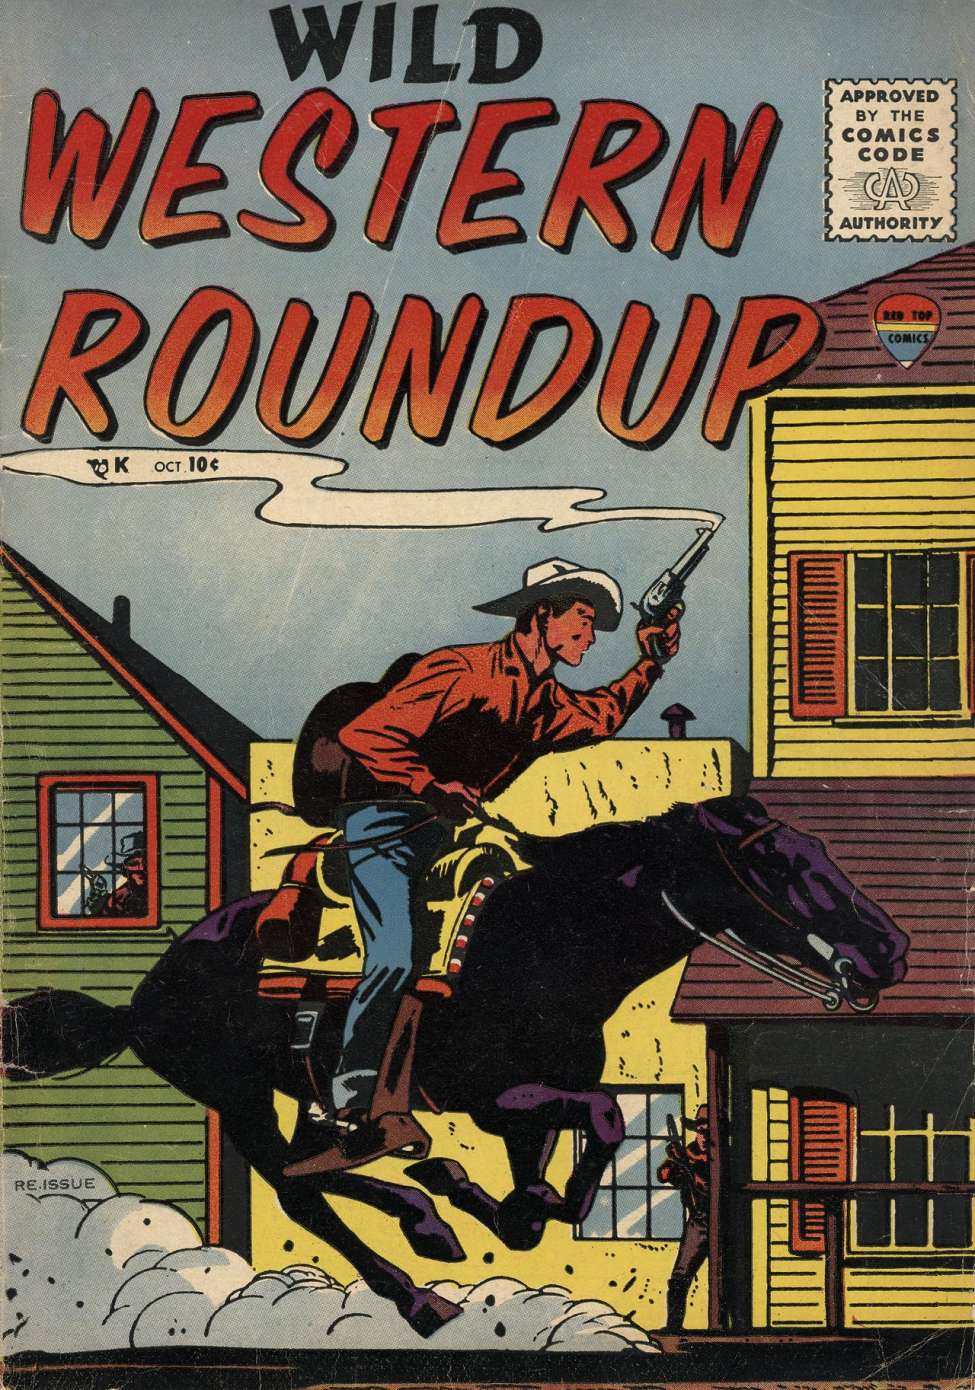 Book Cover For Wild Western Roundup 1